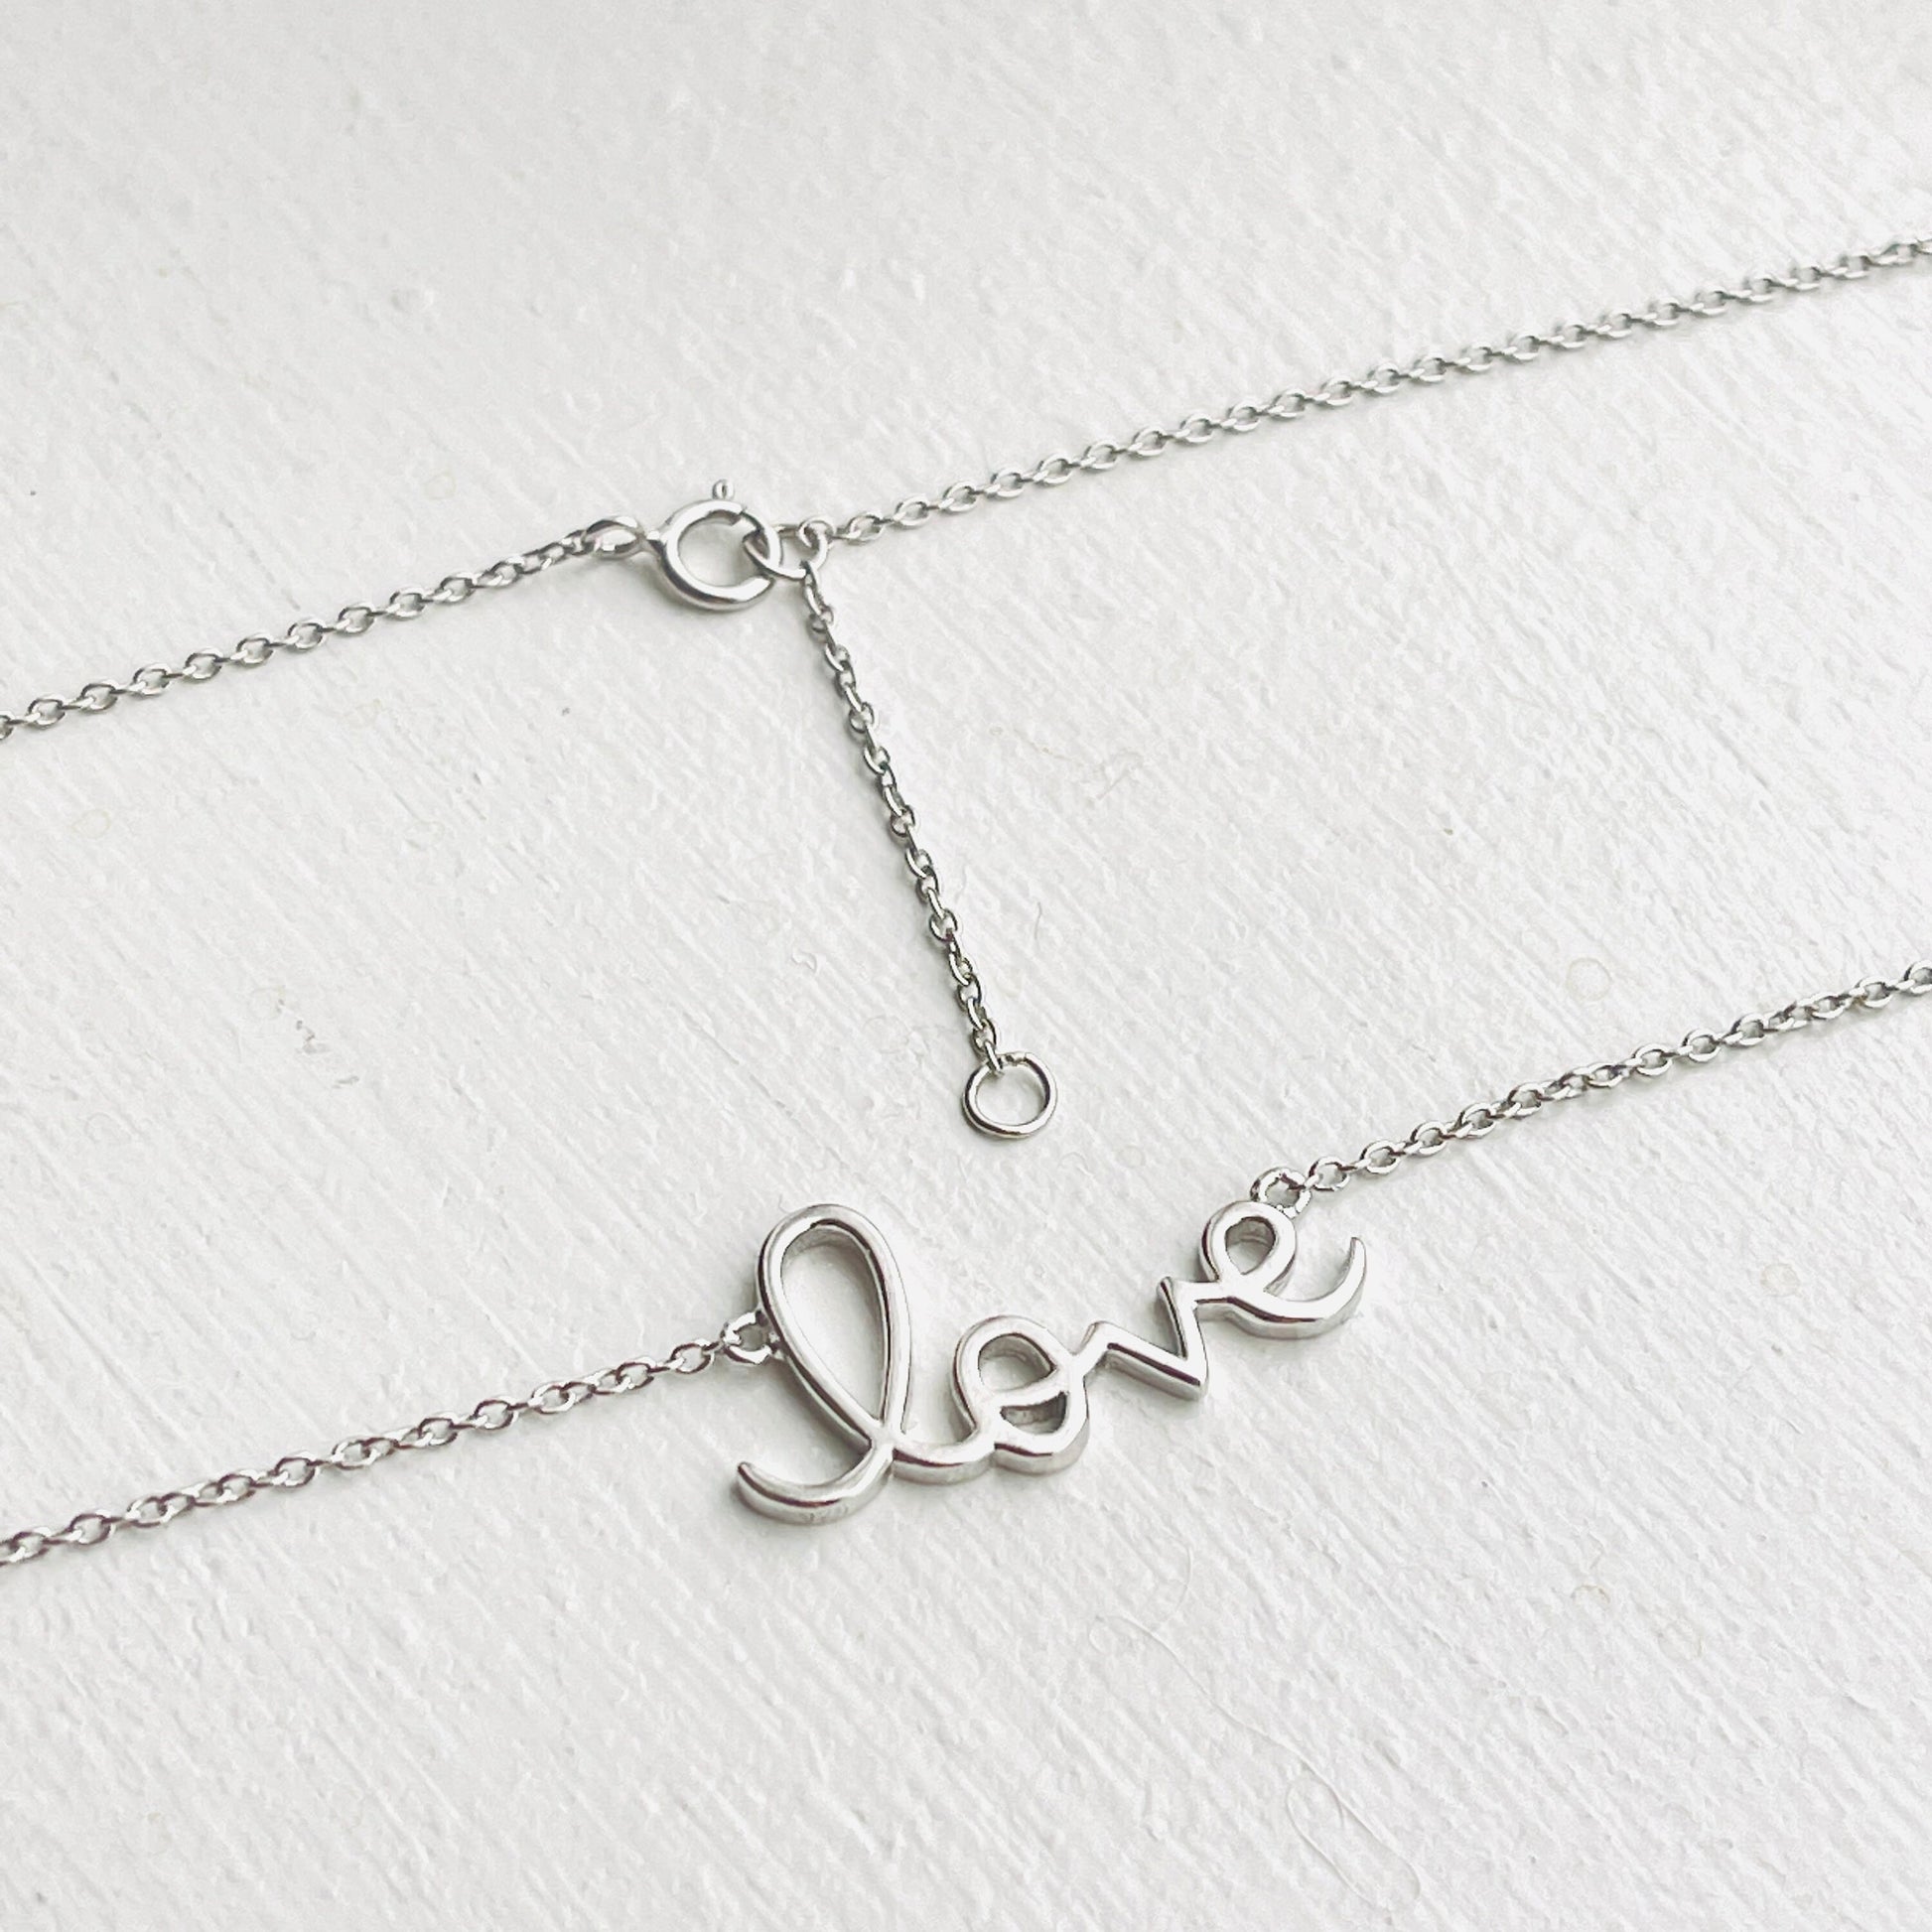 Dainty Love Necklace in Sterling Silver, Silver Love Necklace, Romantic Necklace, A Necklace For Everyday Use, Gifts For Her, Minimal - sjewellery|sara jewellery shop toronto